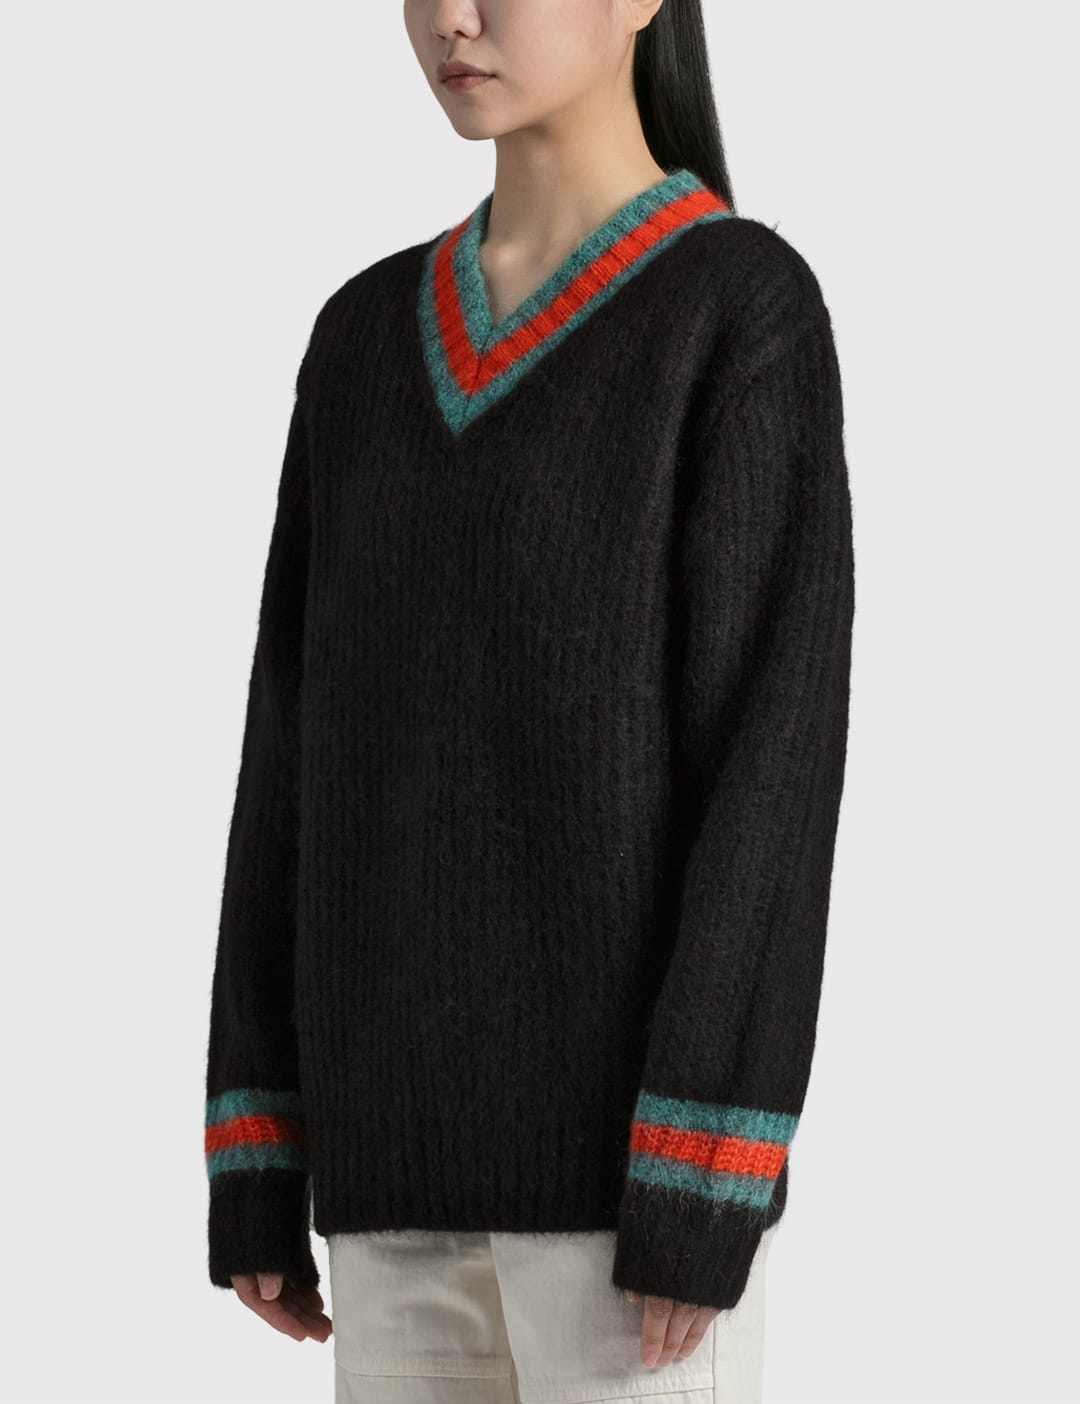 Stüssy - Mohair Tennis Sweater | HBX - Globally Curated Fashion 